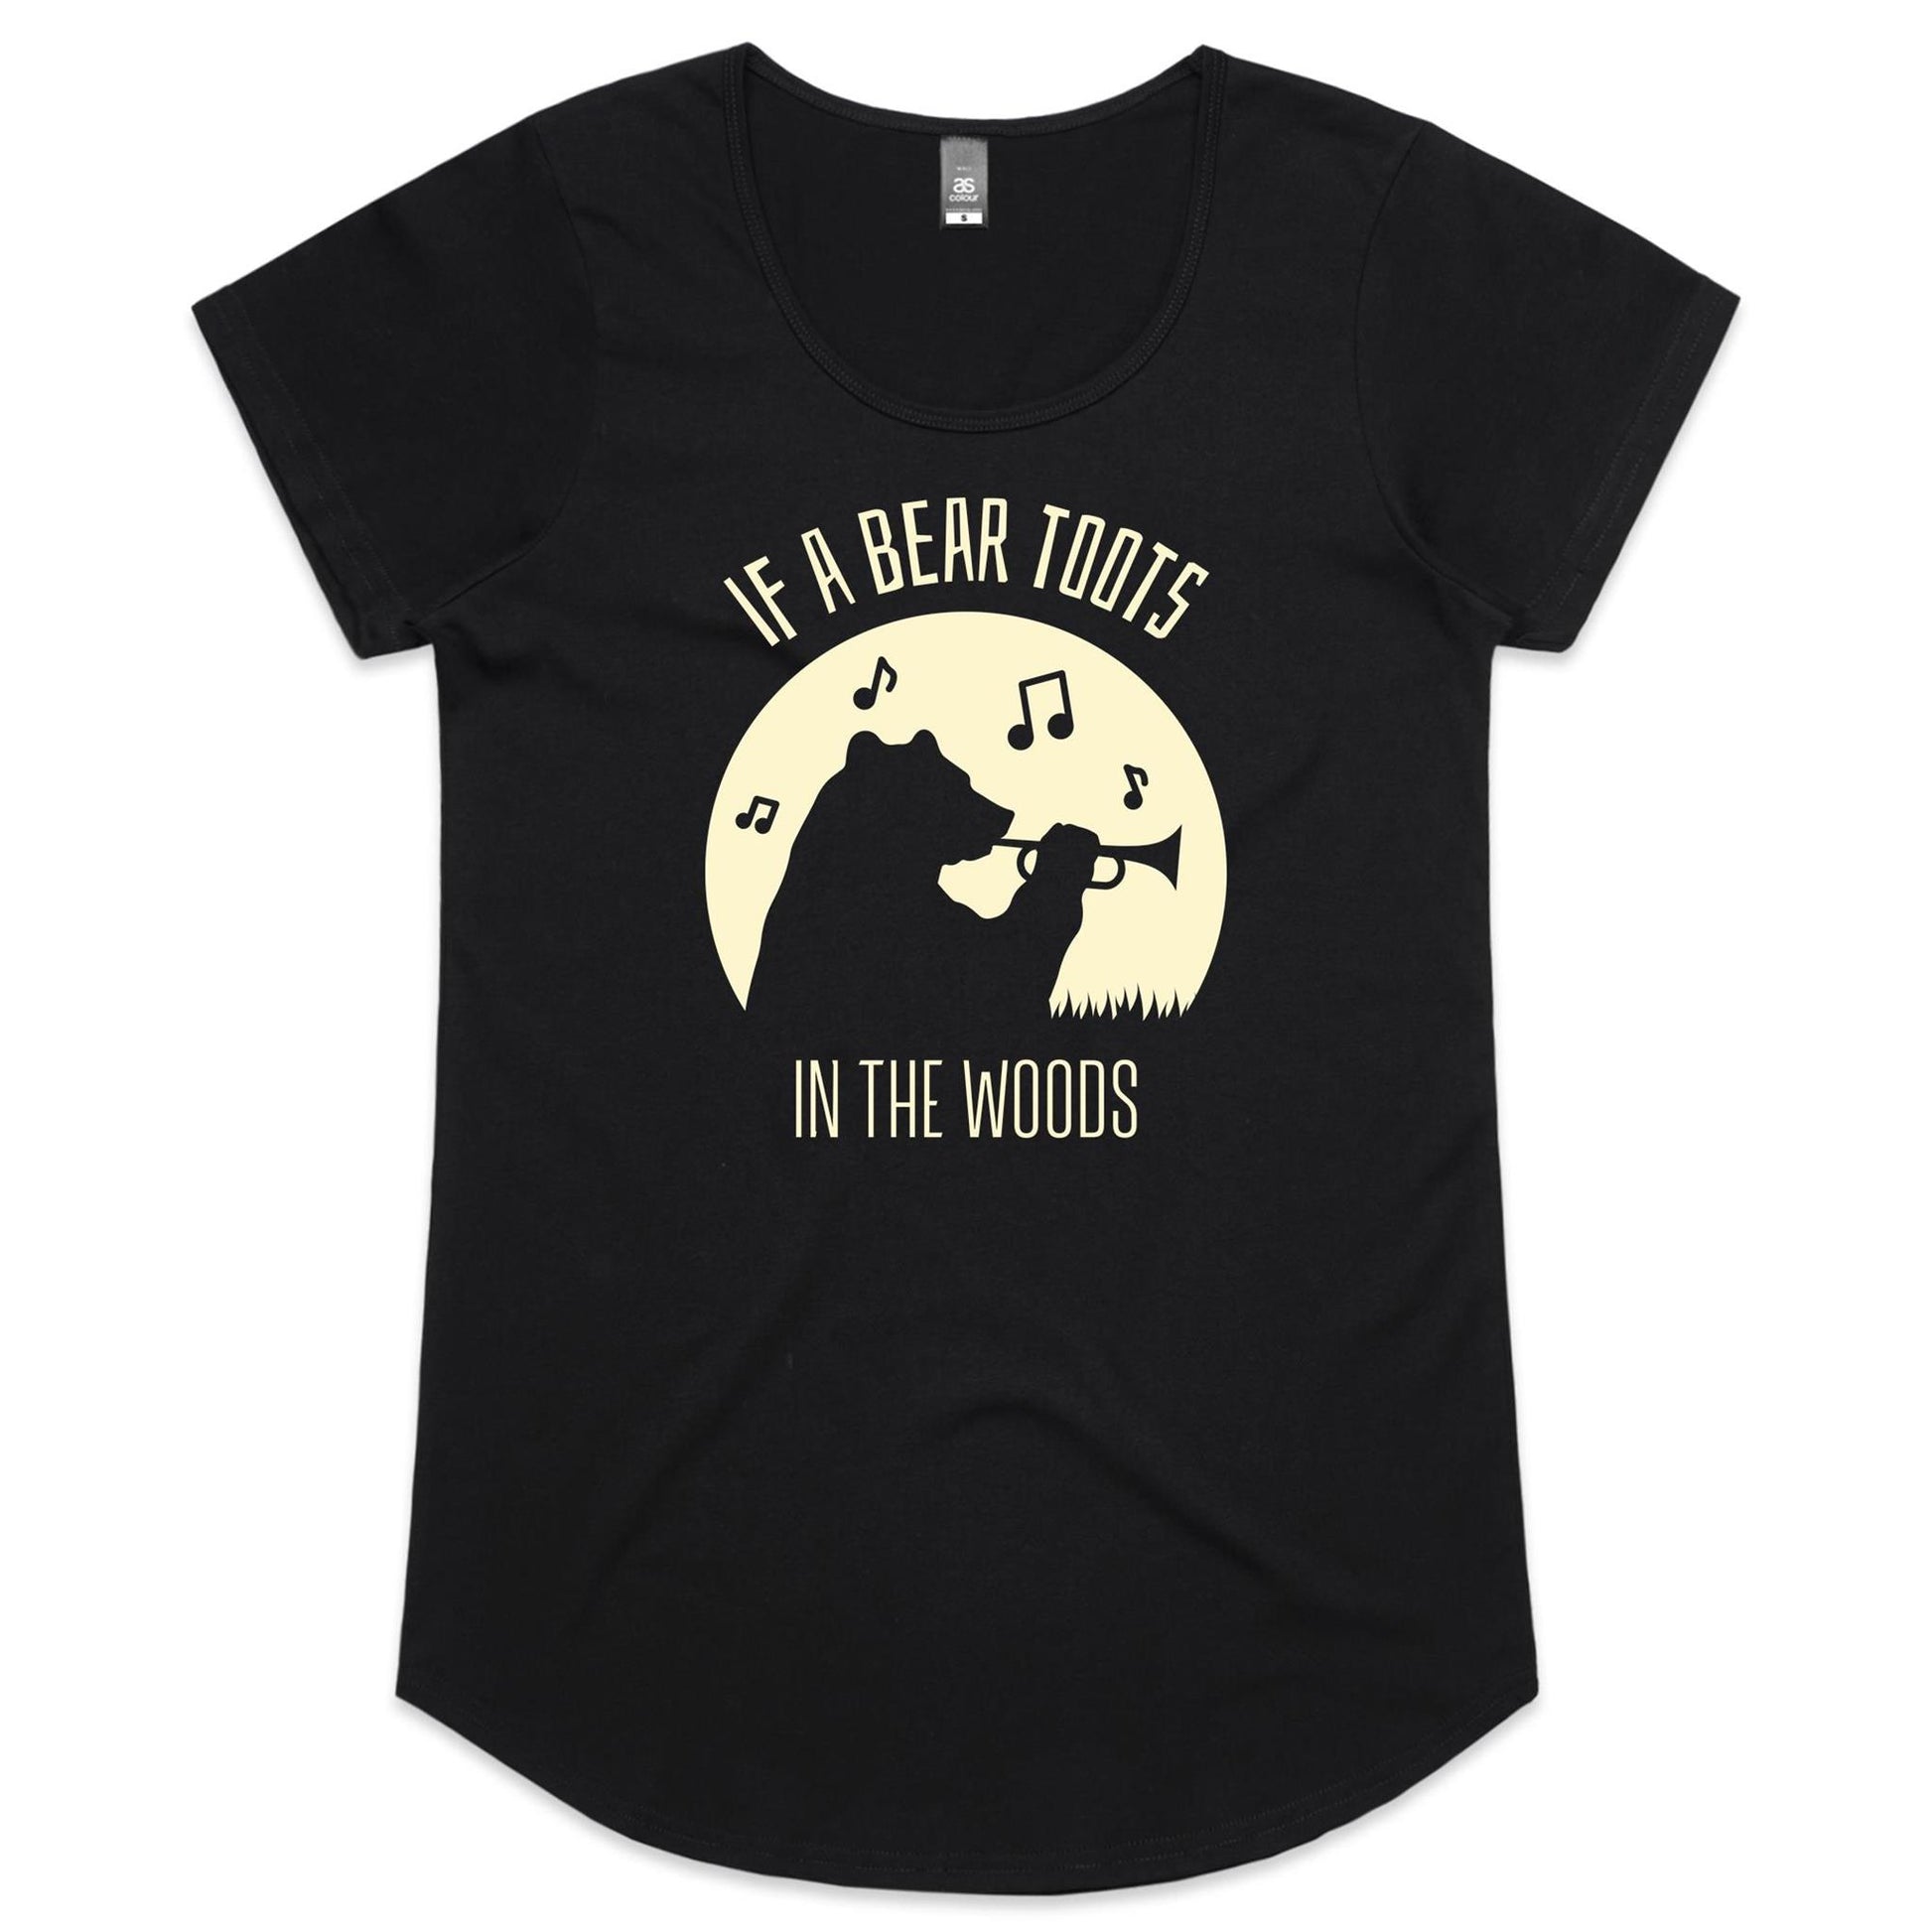 If A Bear Toots In The Woods, Trumpet Player - Womens Scoop Neck T-Shirt Black Womens Scoop Neck T-shirt animal Music